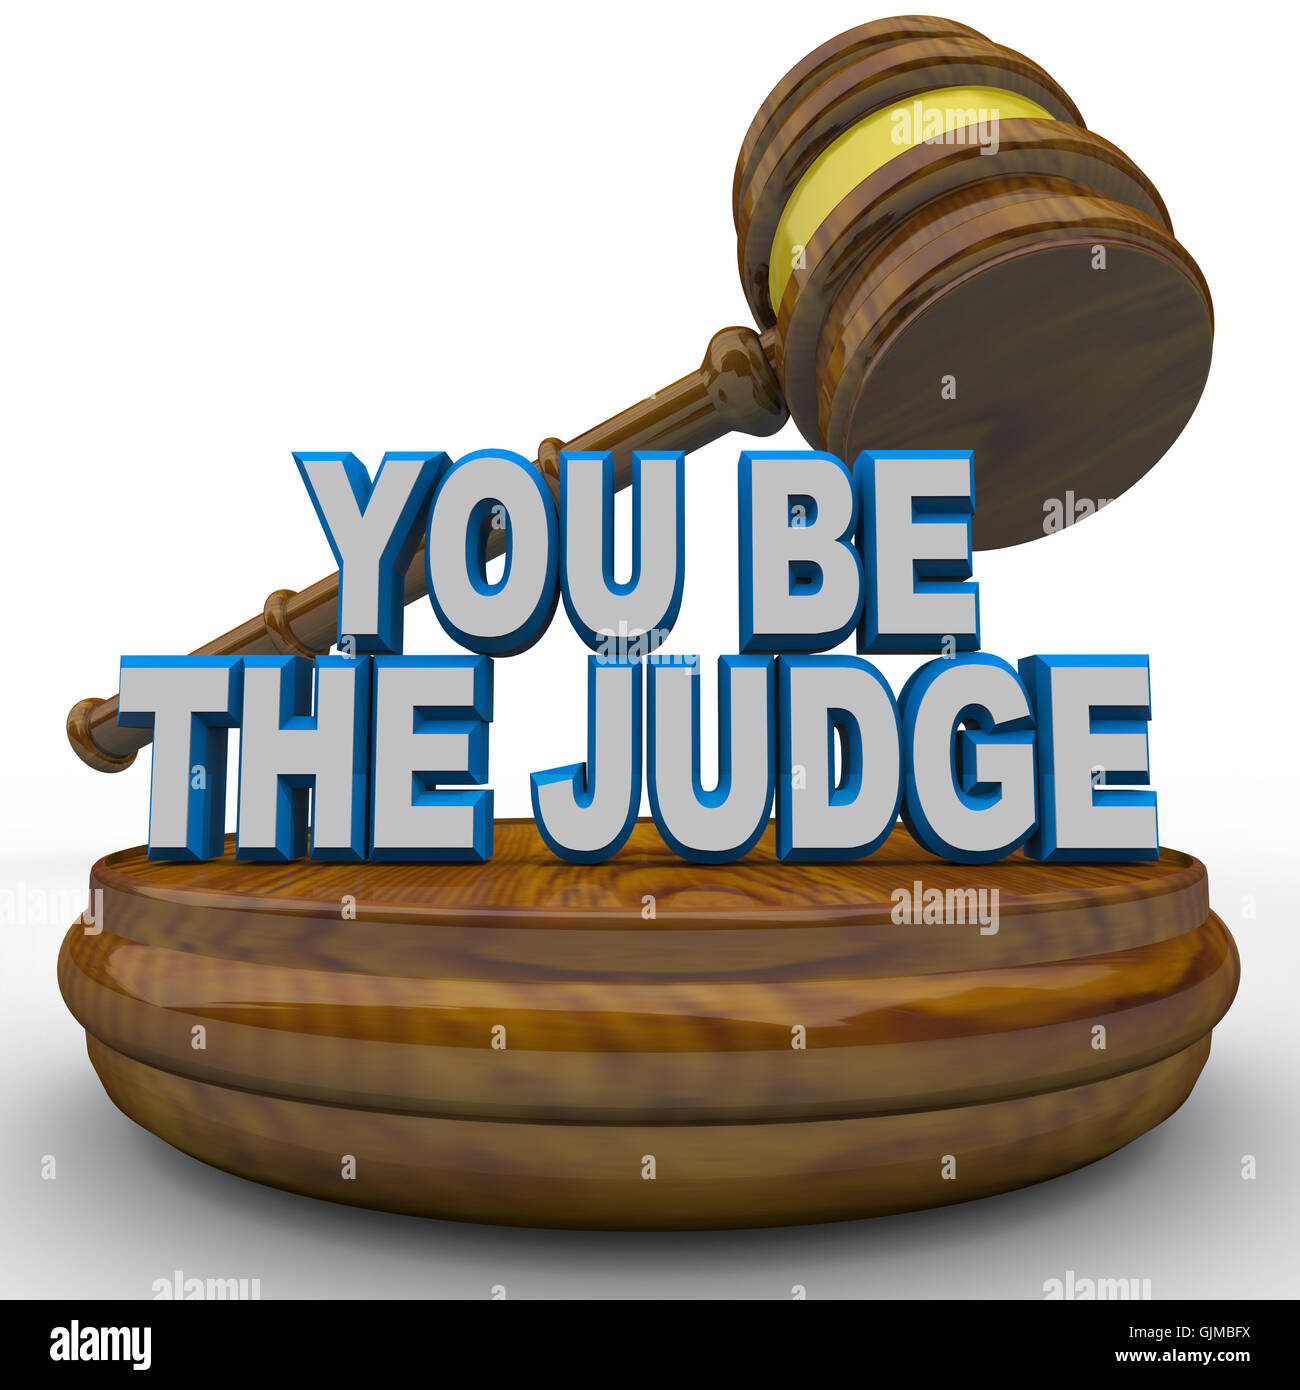 You Be the Judge - Using Gavel to Make Decision Stock Photo